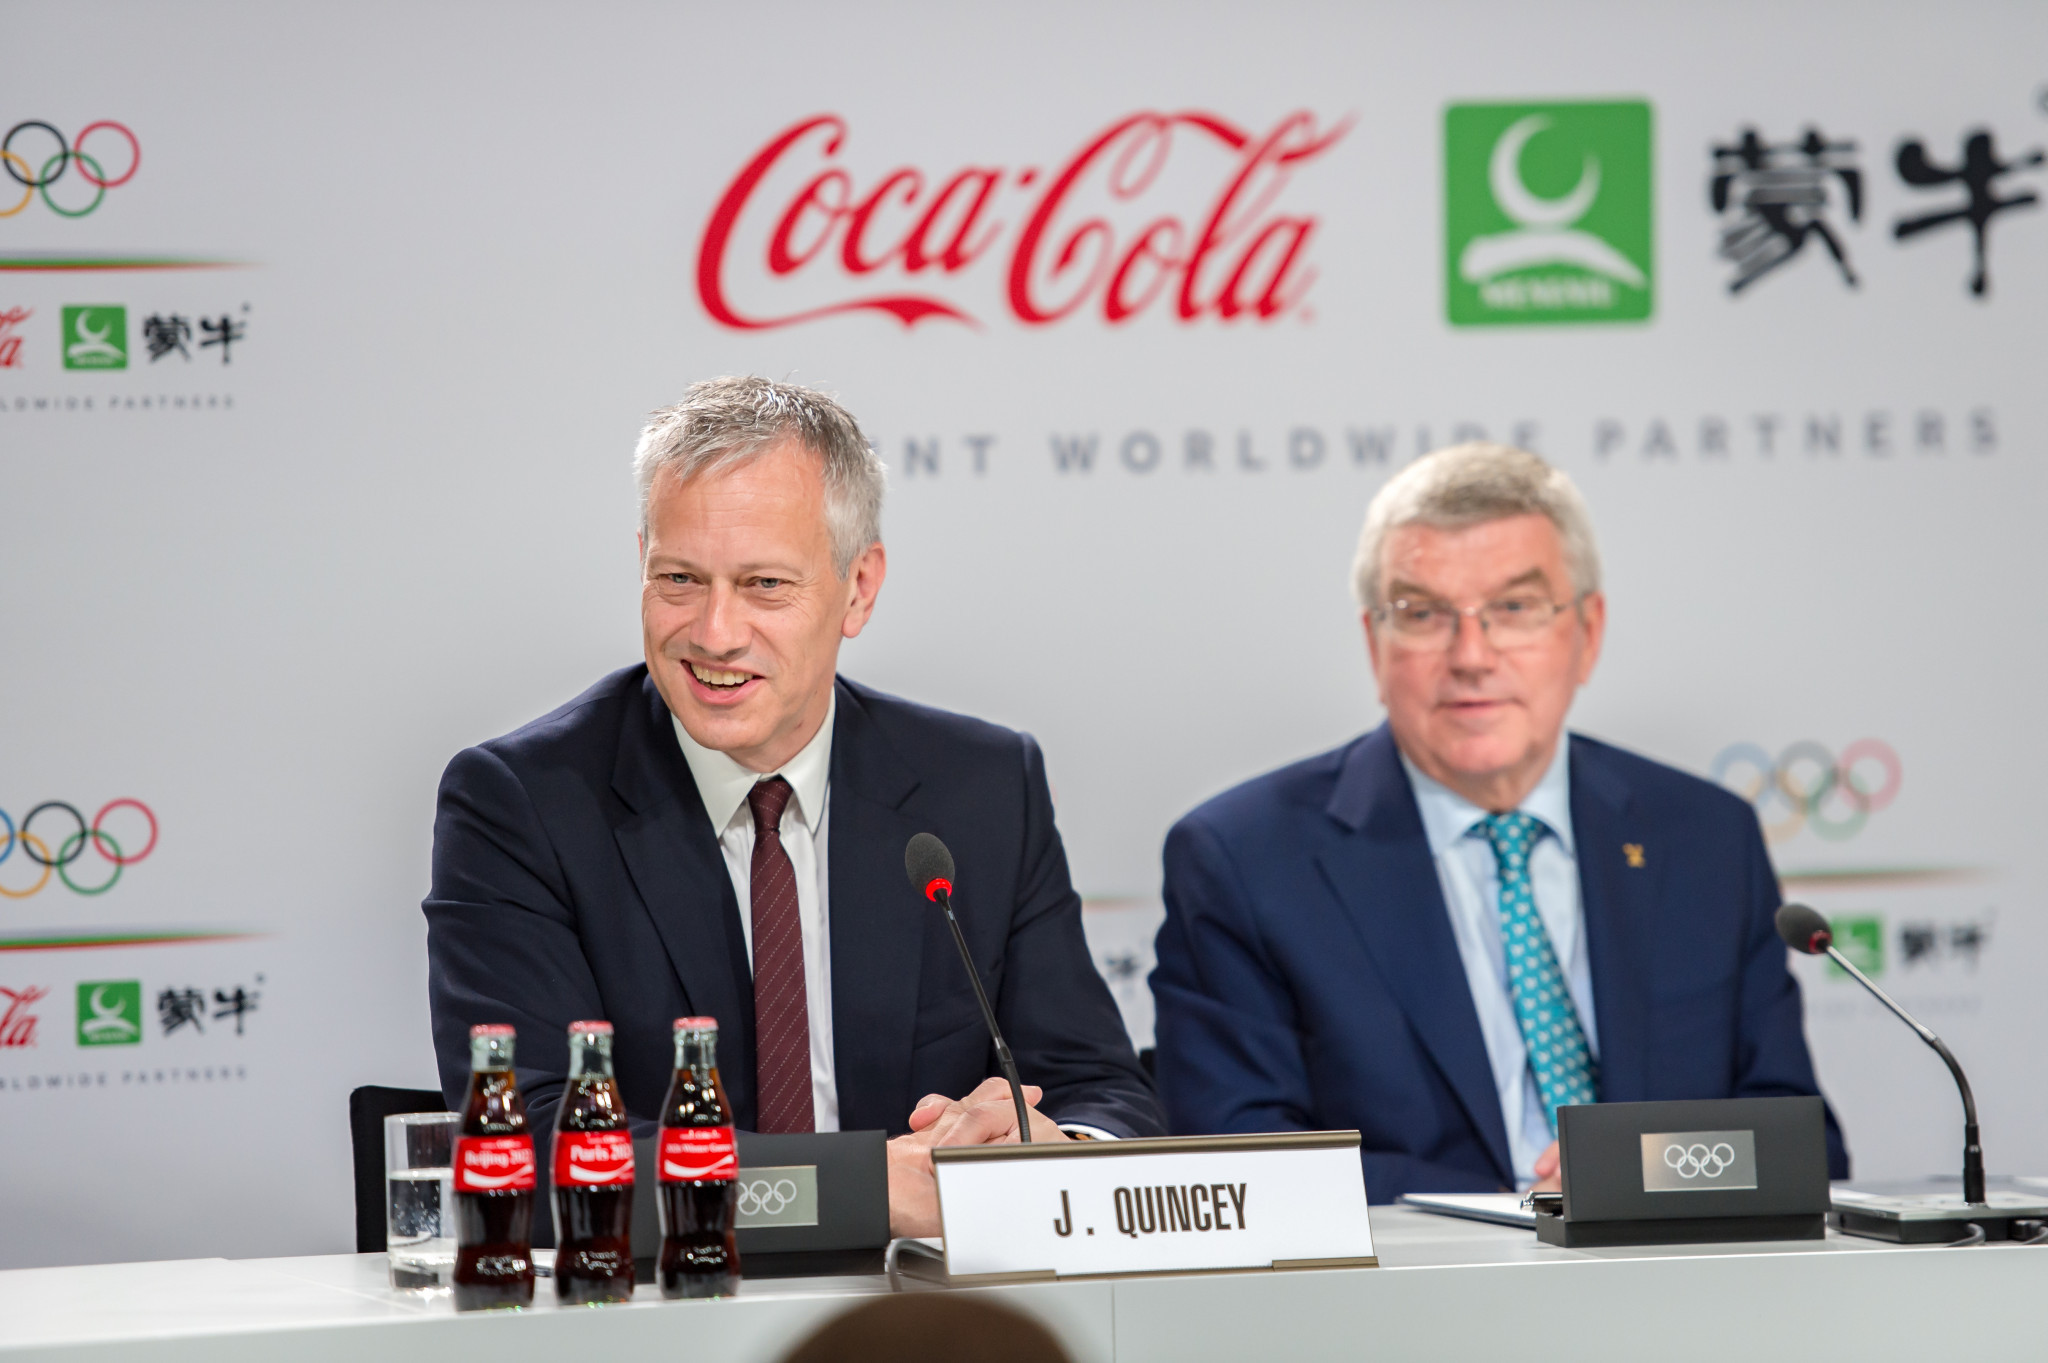 Coca-Cola chairman James Quincey, pictured with IOC President Thomas Bach ©Getty Images